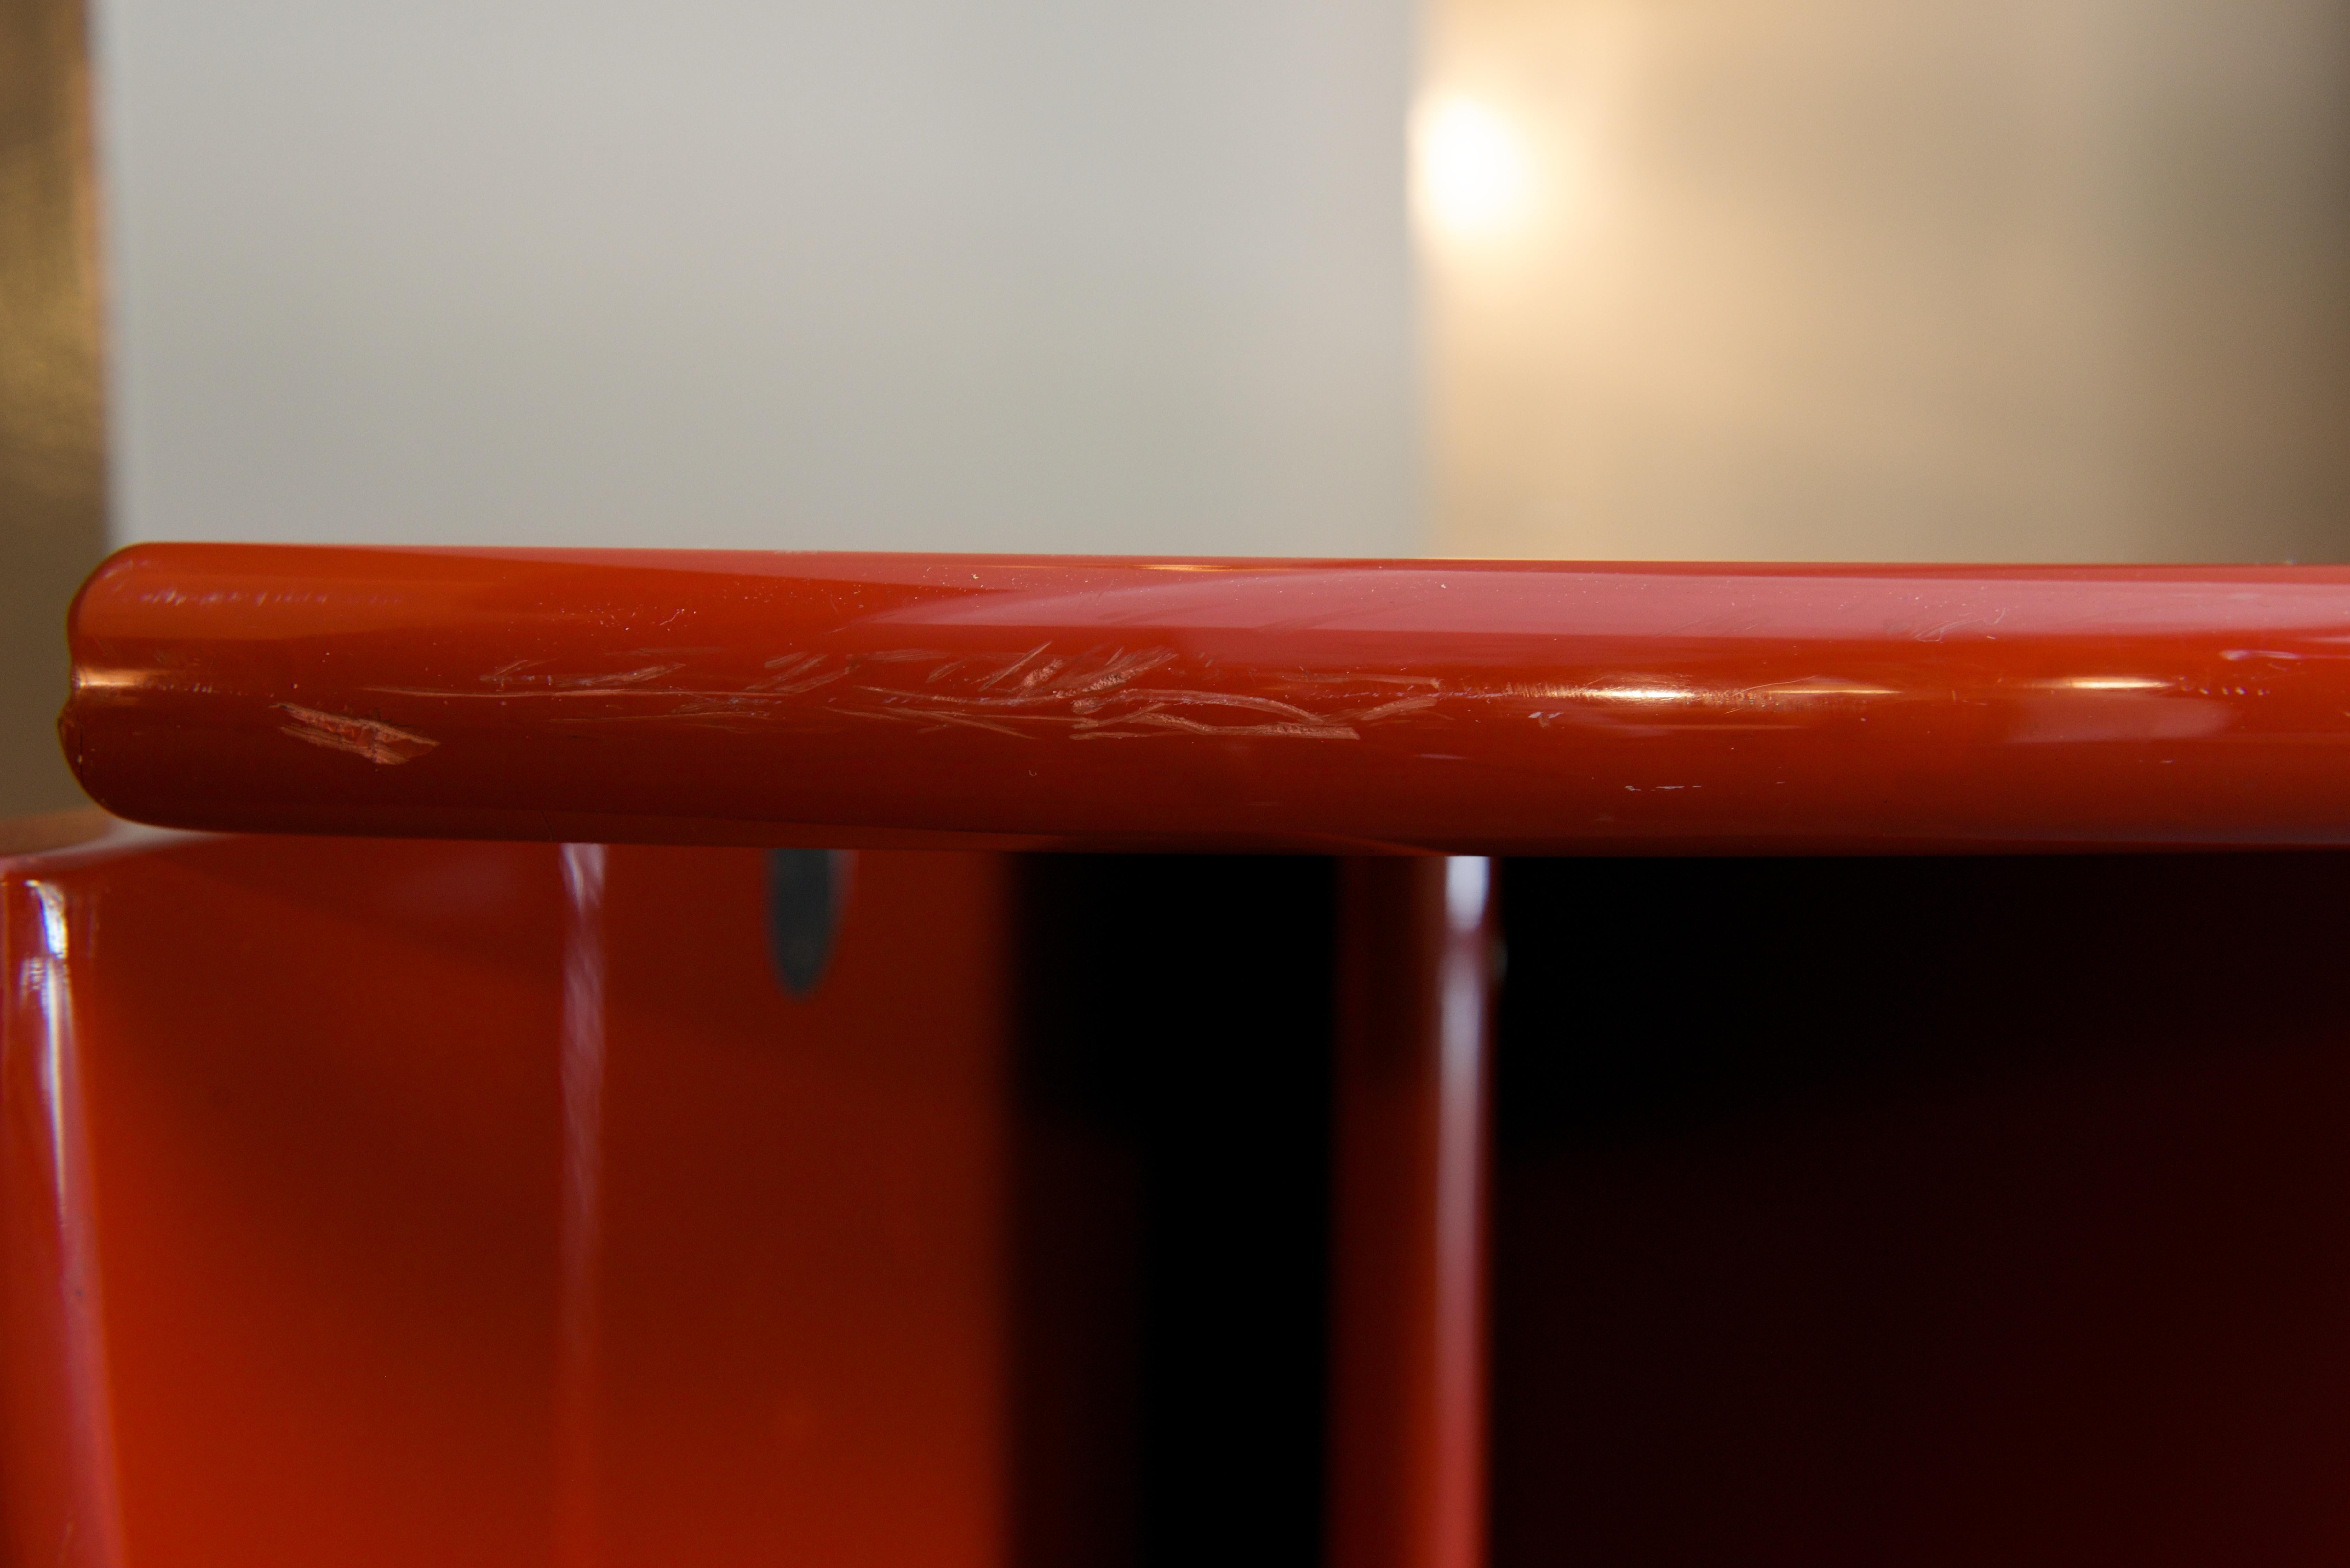 Antella, Oval Console Table by K. Takahama for Simon, Red Lacquer, Italy, 1978 1